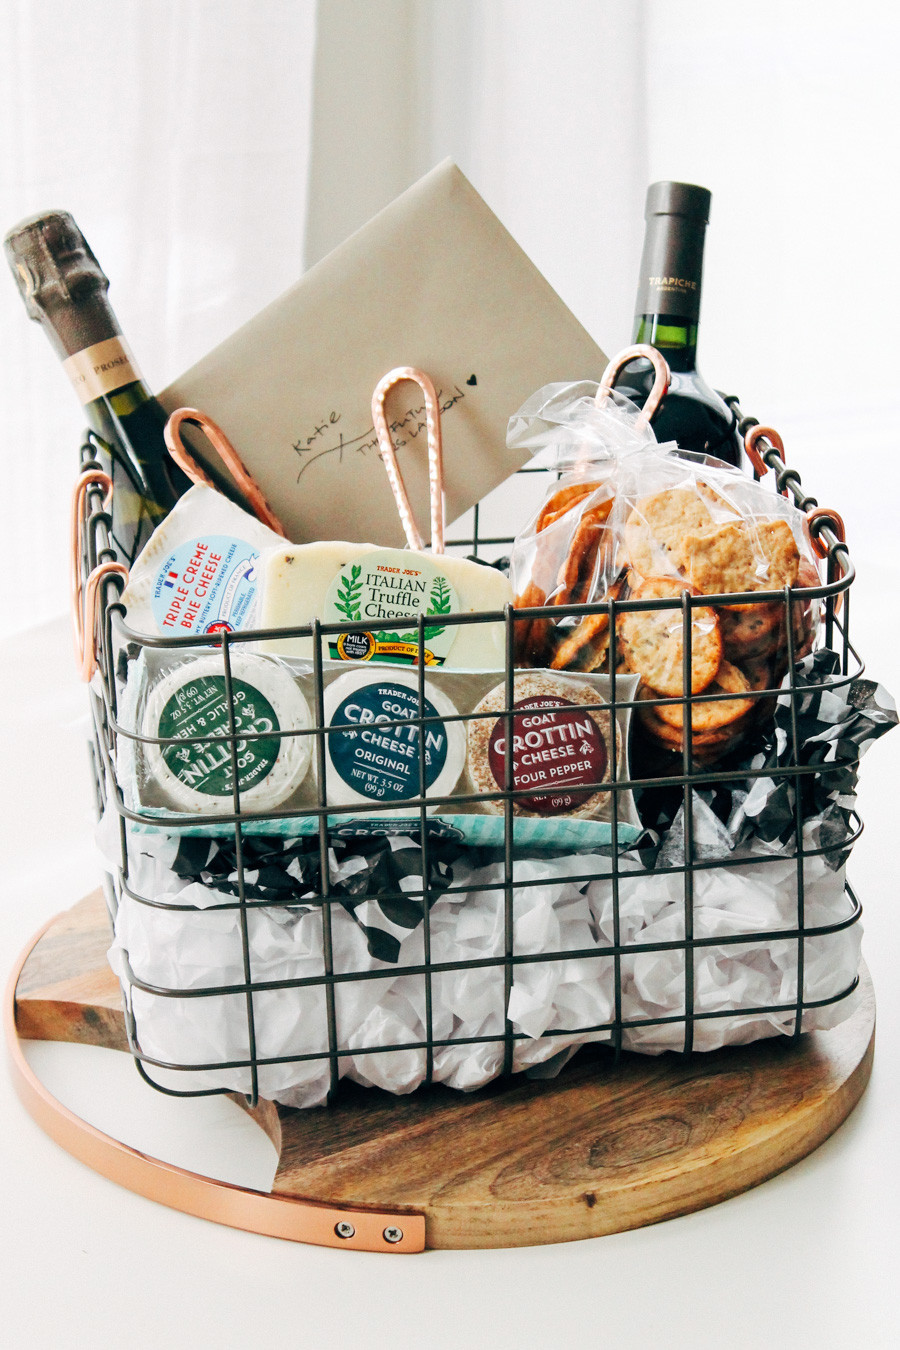 Wine Gift Basket Ideas
 the ultimate cheese t basket playswellwithbutter